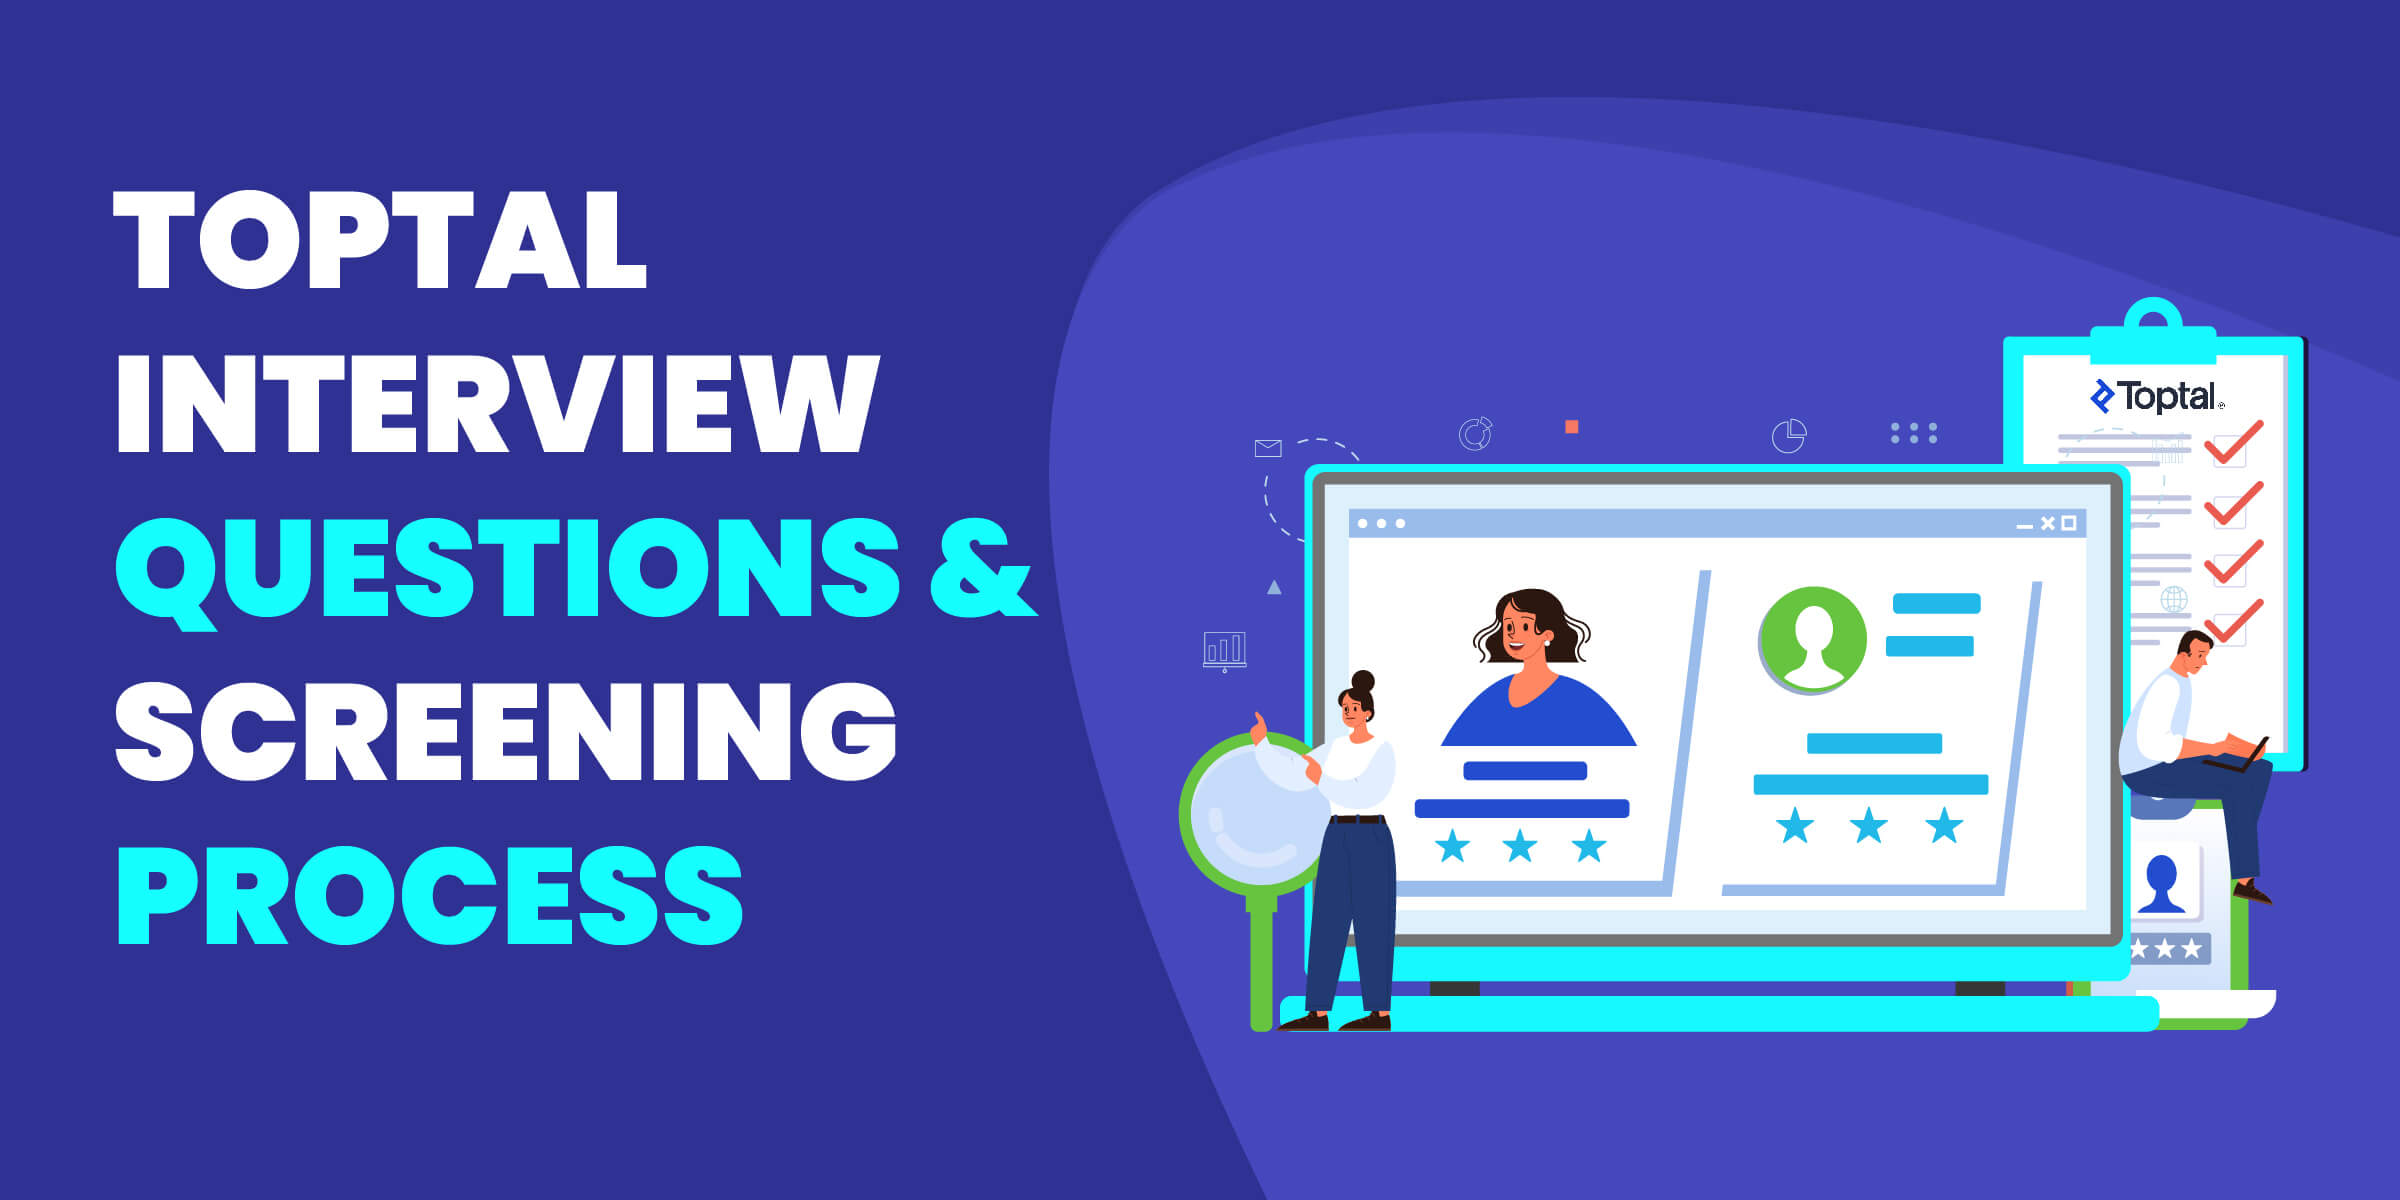 Toptal Interview and Screening Process